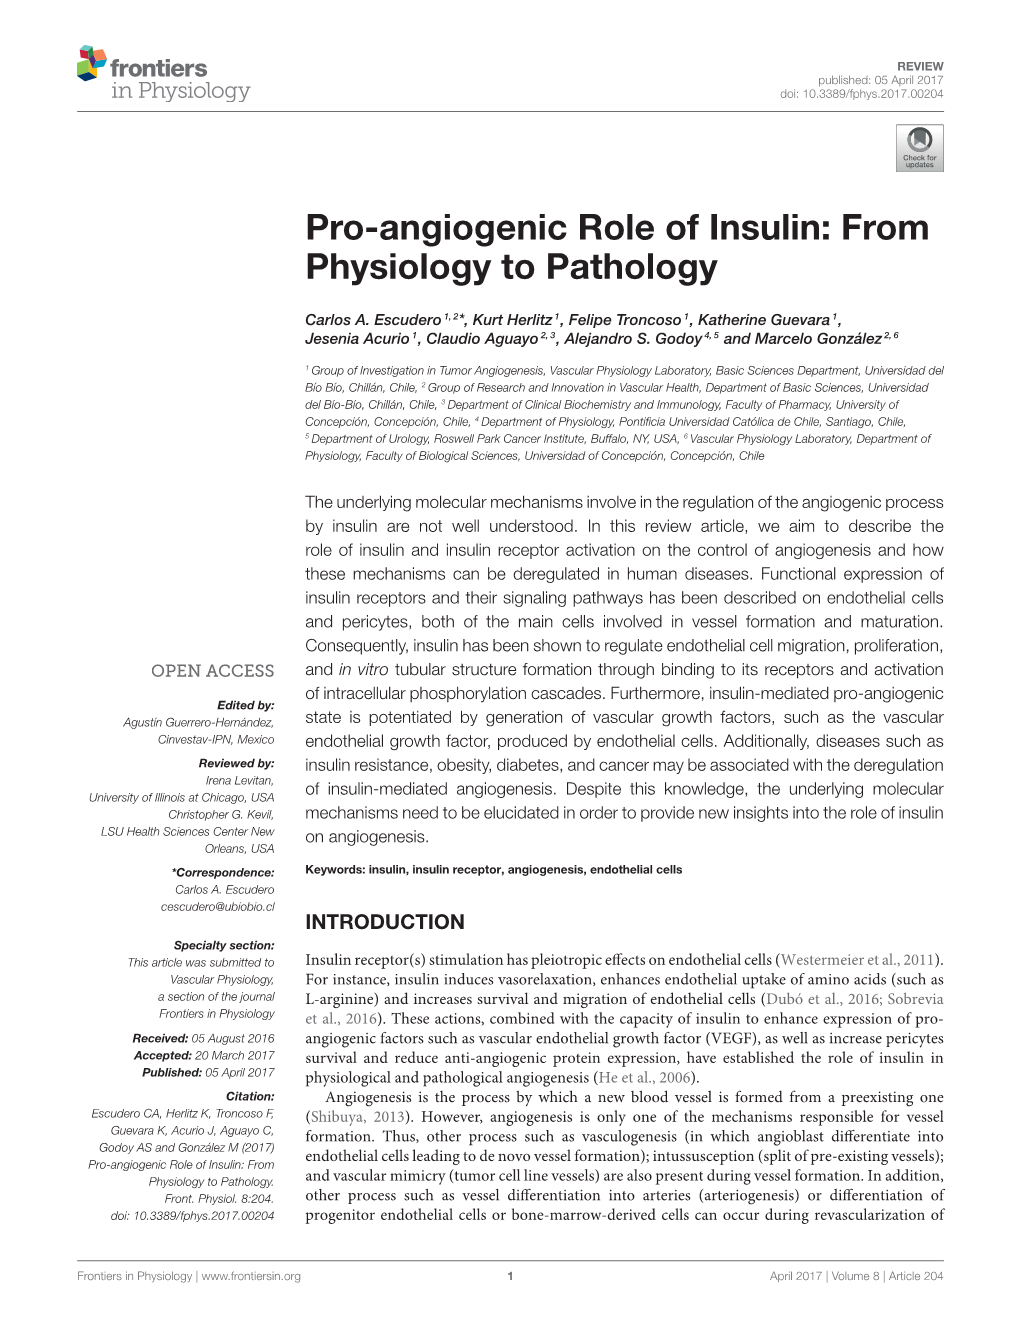 Pro-Angiogenic Role of Insulin: from Physiology to Pathology